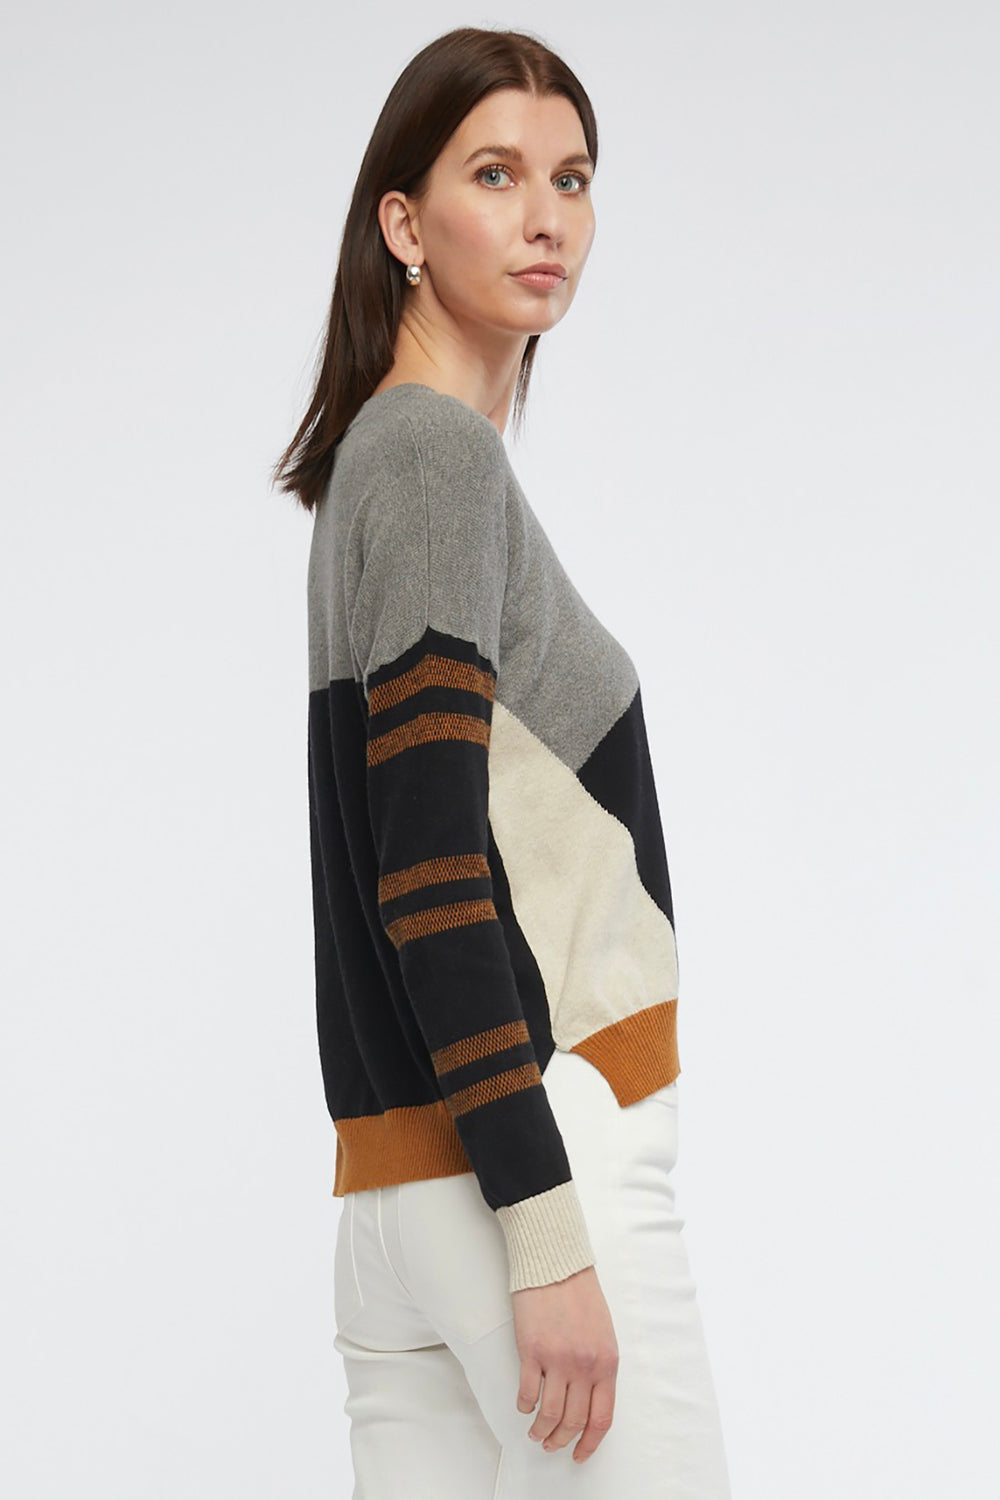 Eclectic Intarsia Jumper in cloud by Zacket & Plover side view